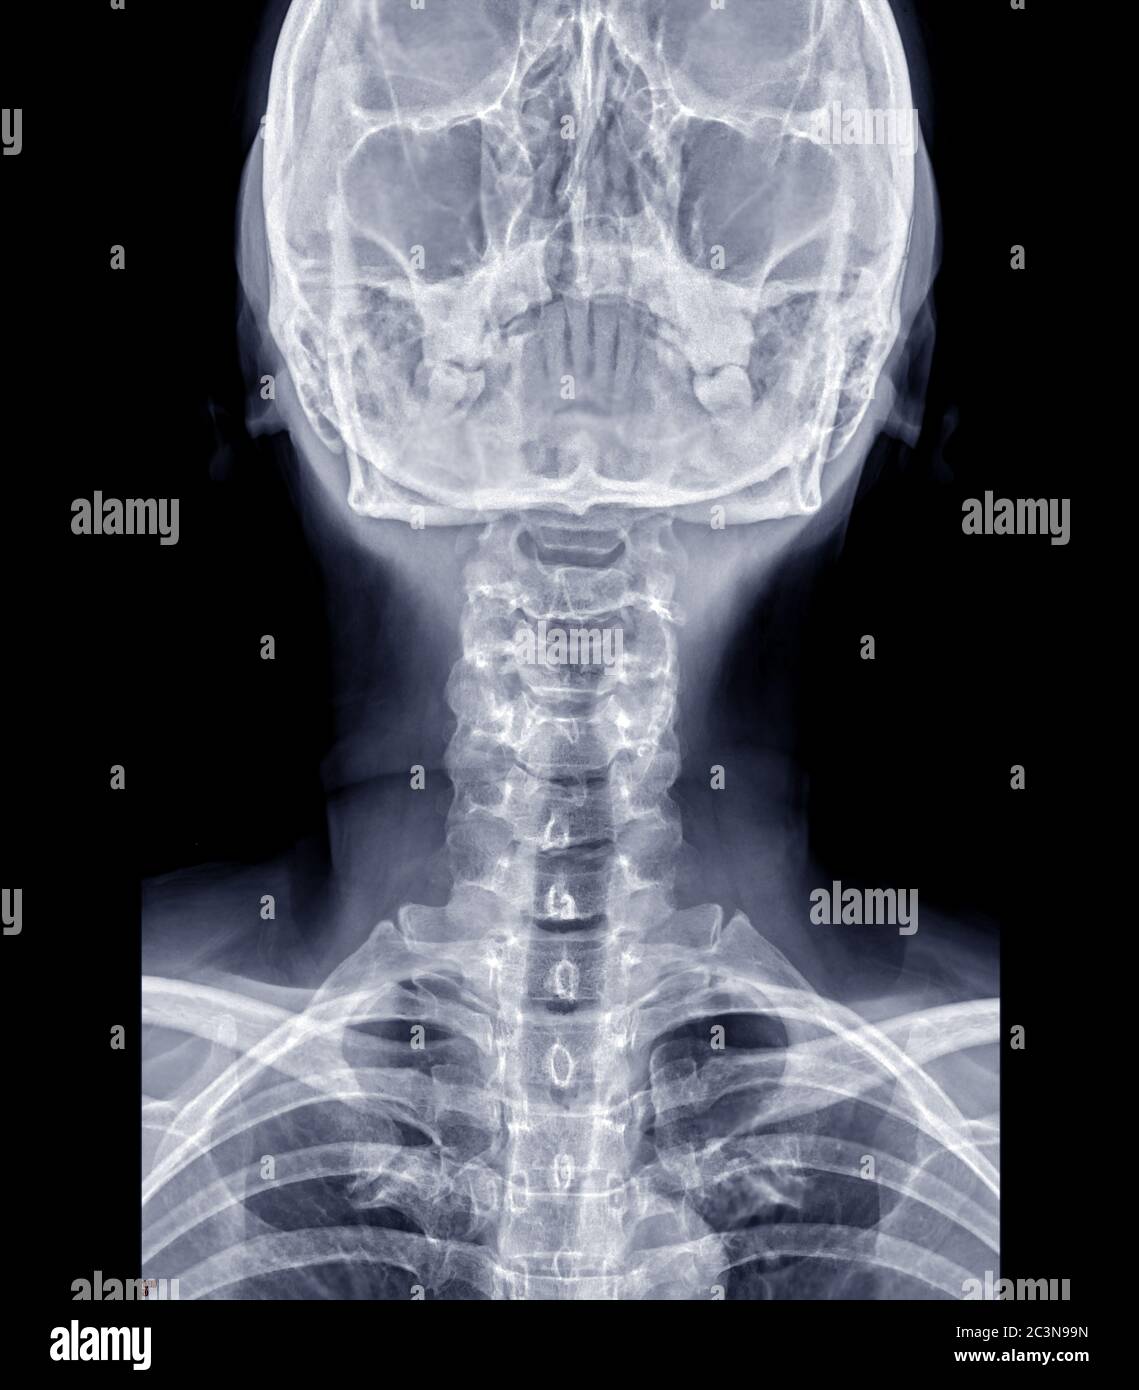 X-ray C-spine or x-ray image of Cervical spine AP  view for diagnostic intervertebral disc herniation. Stock Photo